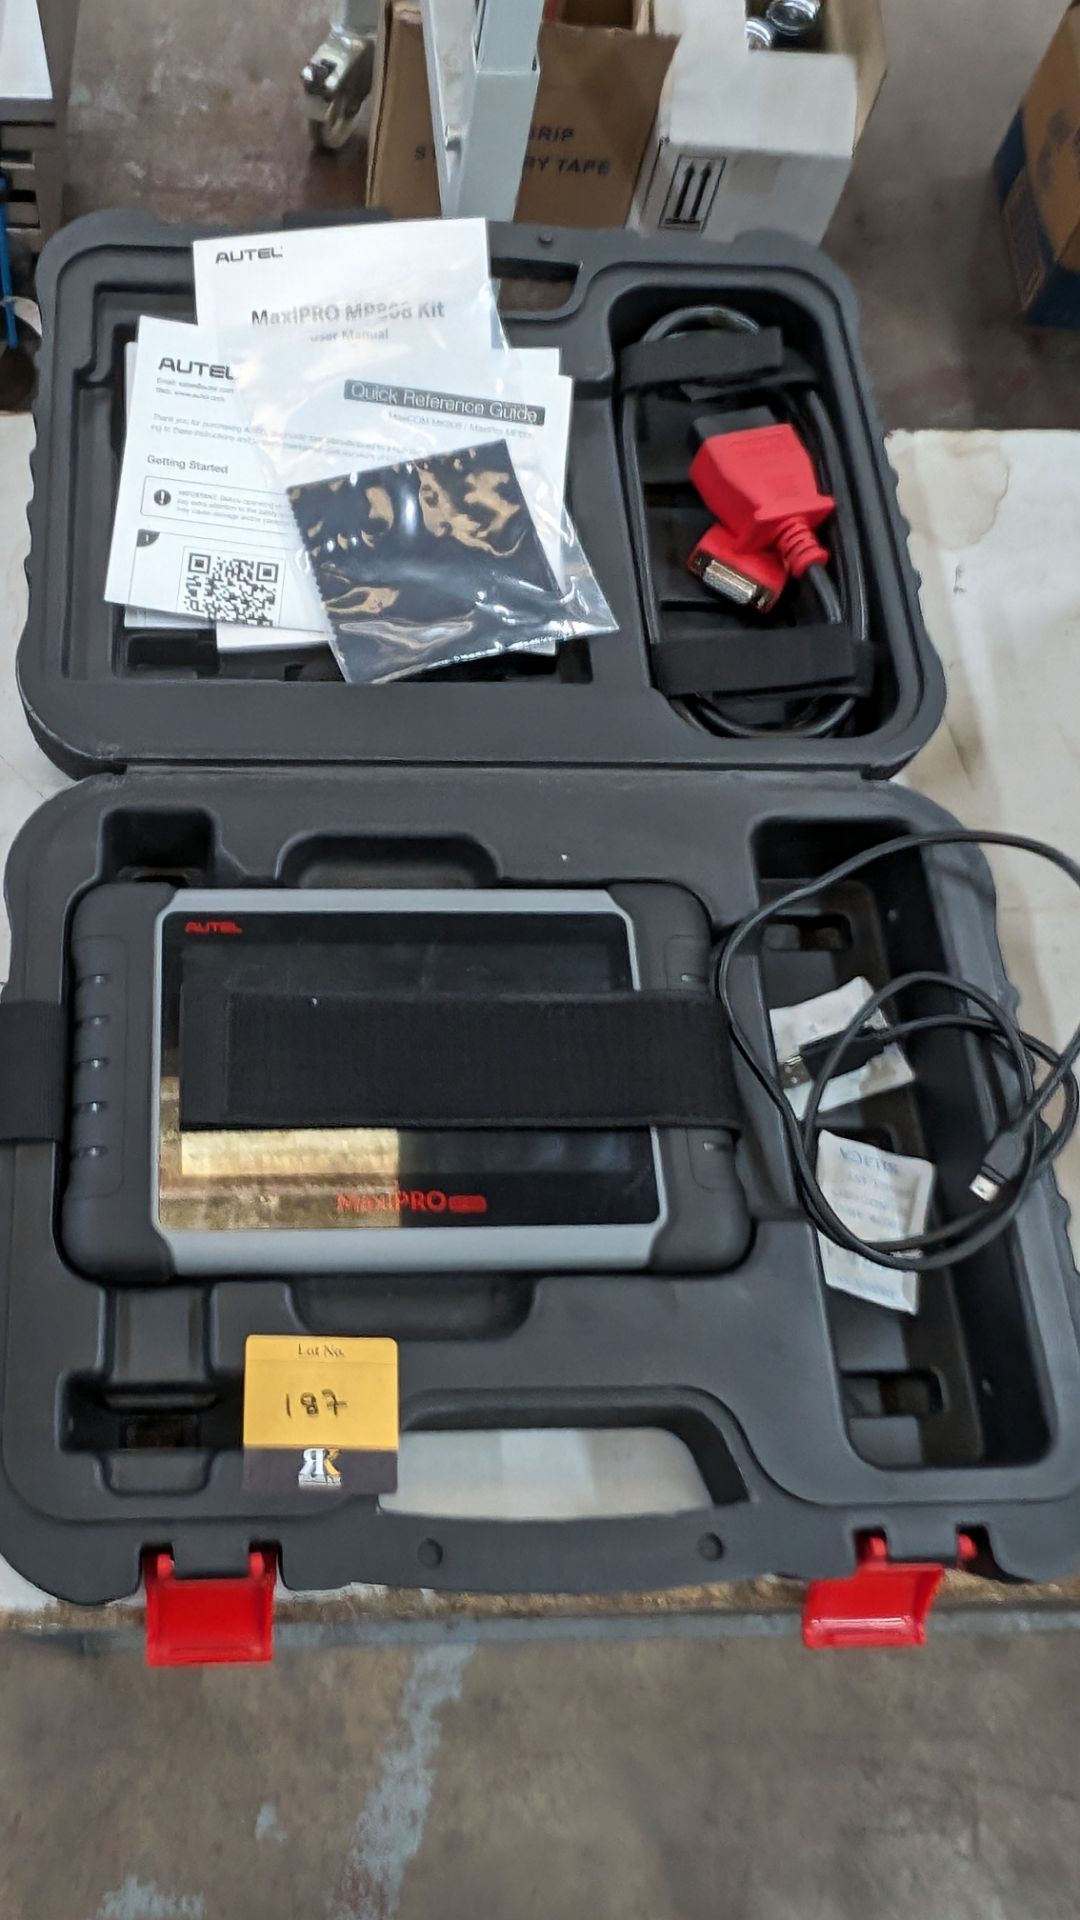 Autel MaxiPRO model MP808 touchscreen diagnostics device including case, cables & book pack - Image 11 of 11